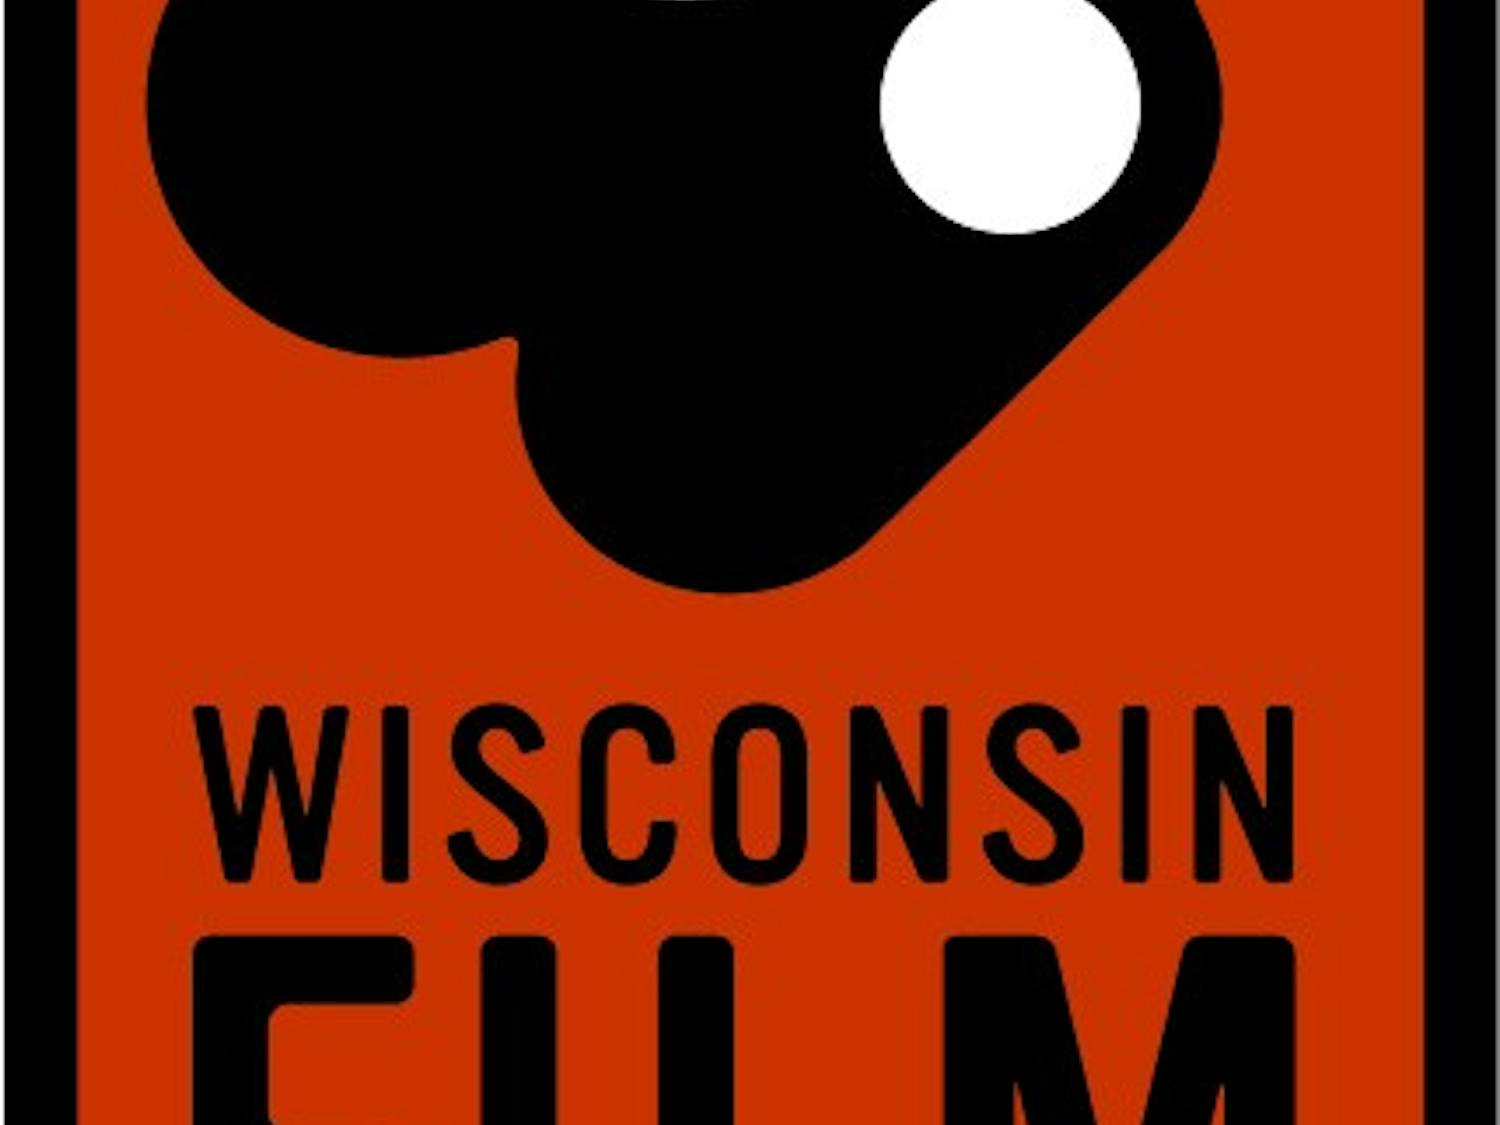 Previewing the Wisconsin Film Festival